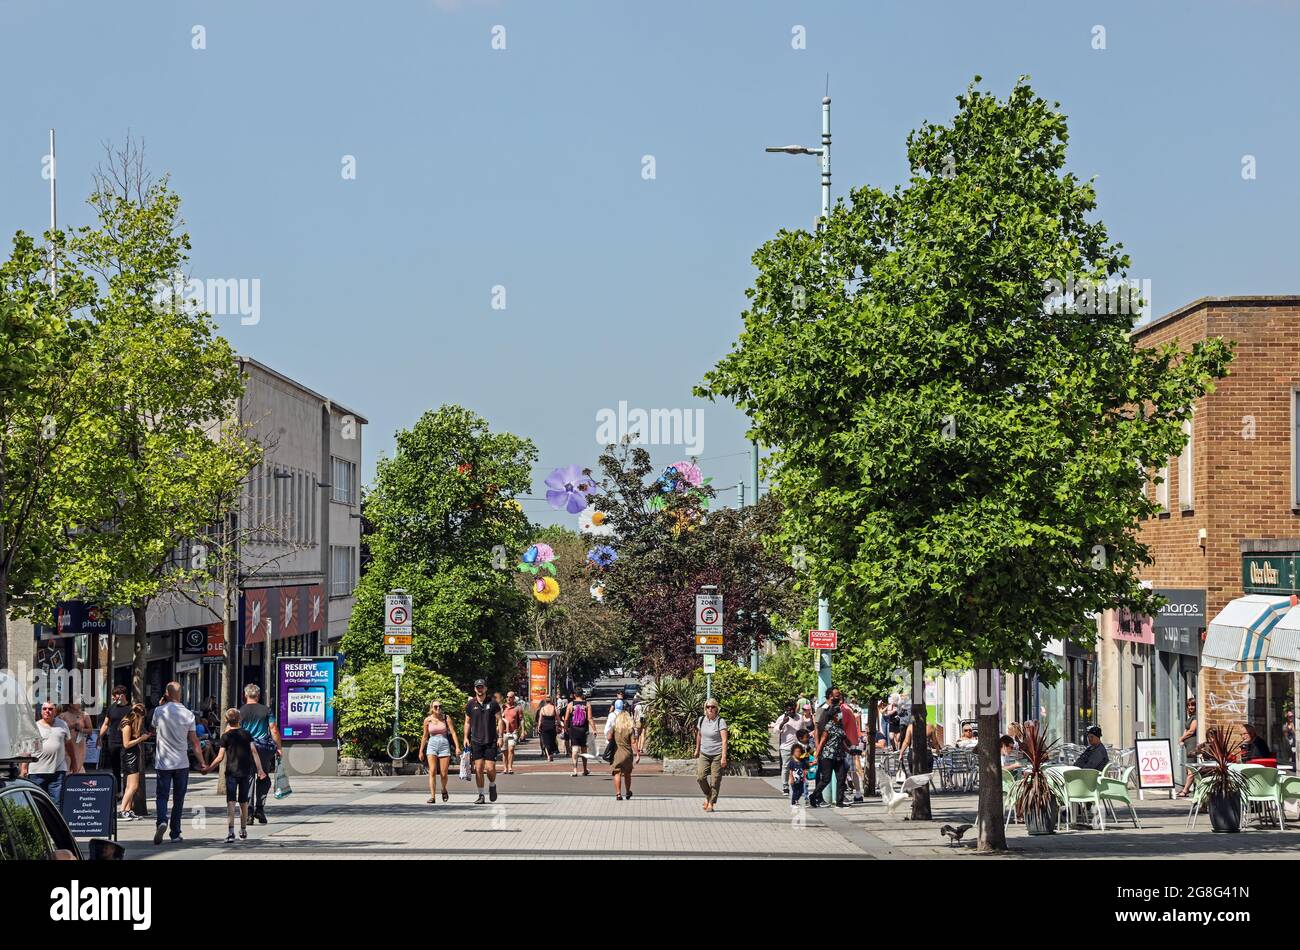 Plymouth’s Cornwall Street. Shoppers returning but sicial distancing mid July 2021. Trees bring colour to the wide pedestrianised shopping area. Stock Photo